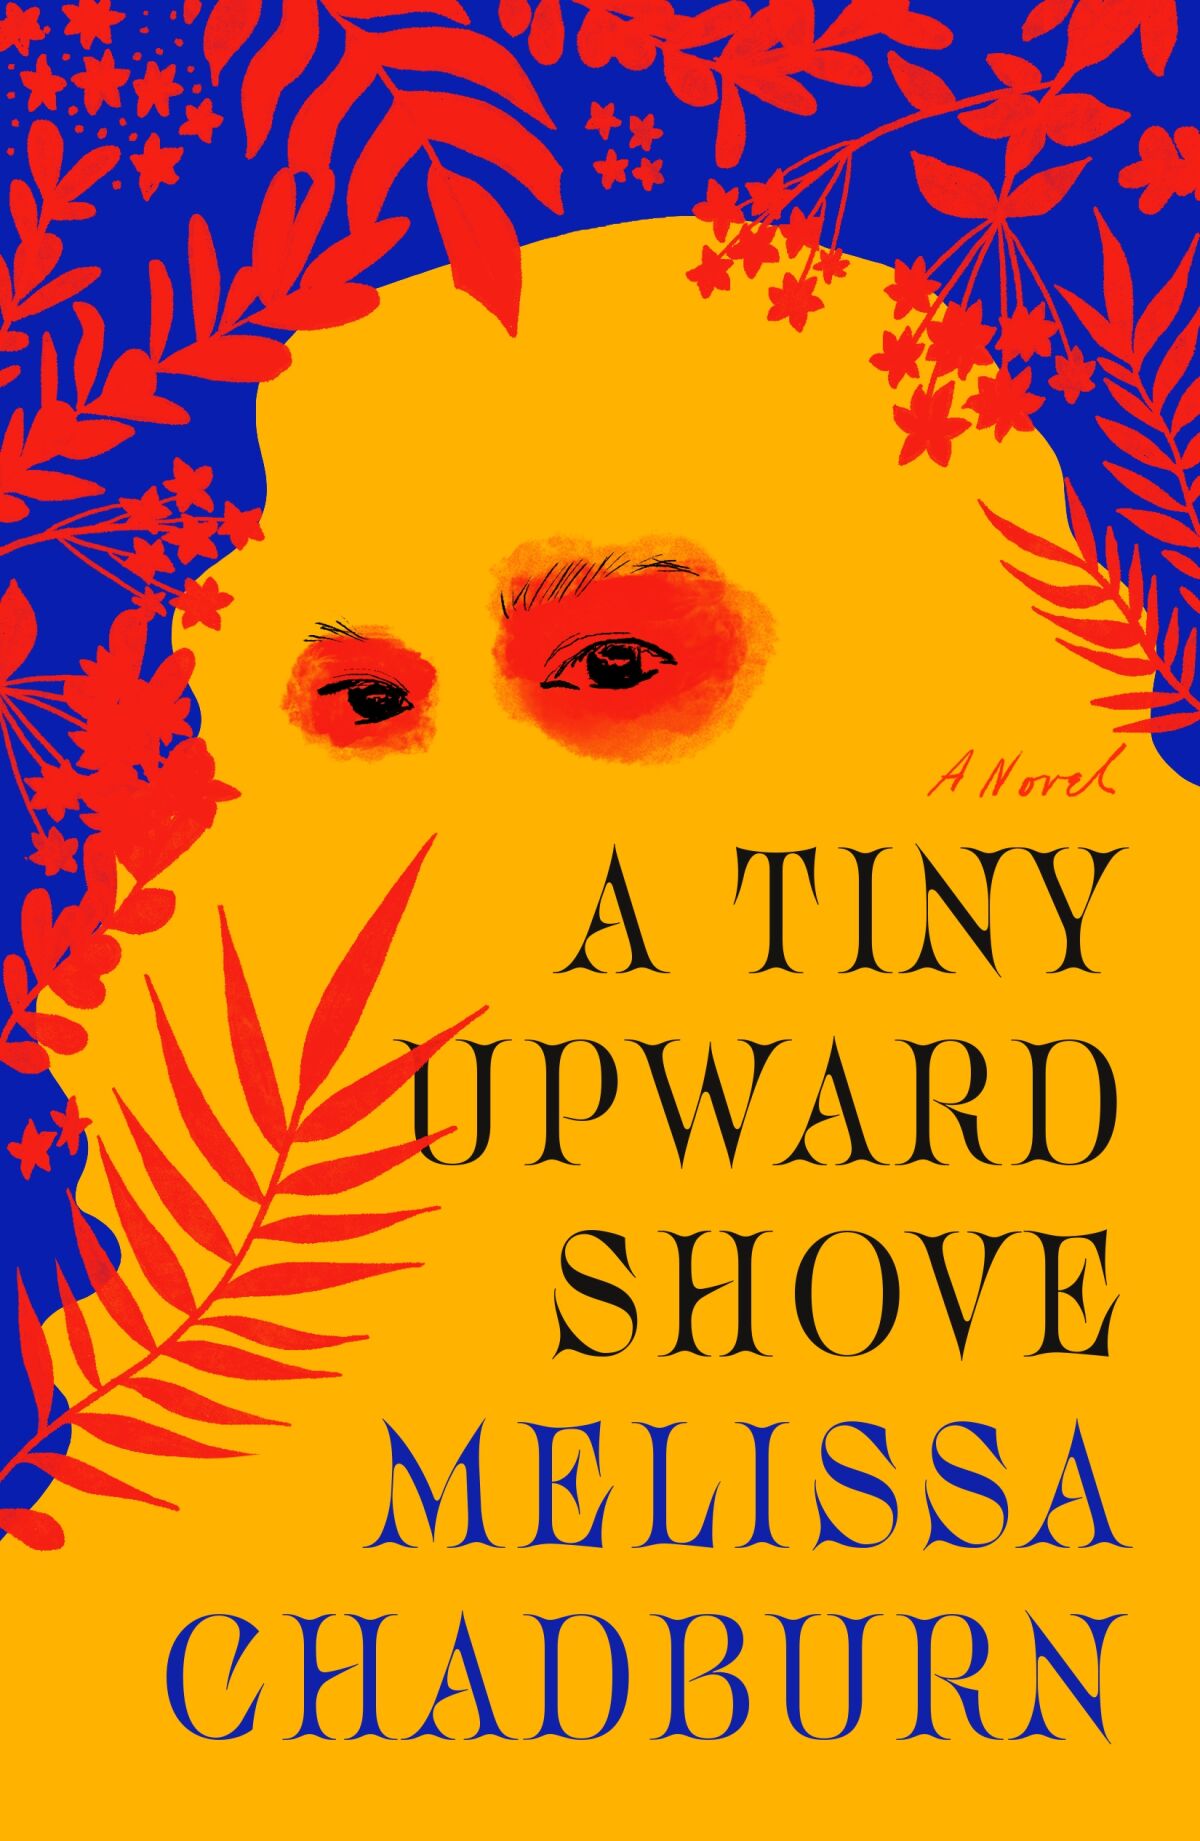 Book cover for "A Tiny Upward Shove," by Melissa Chadburn, shows a yellow creature with red plants on a blue background